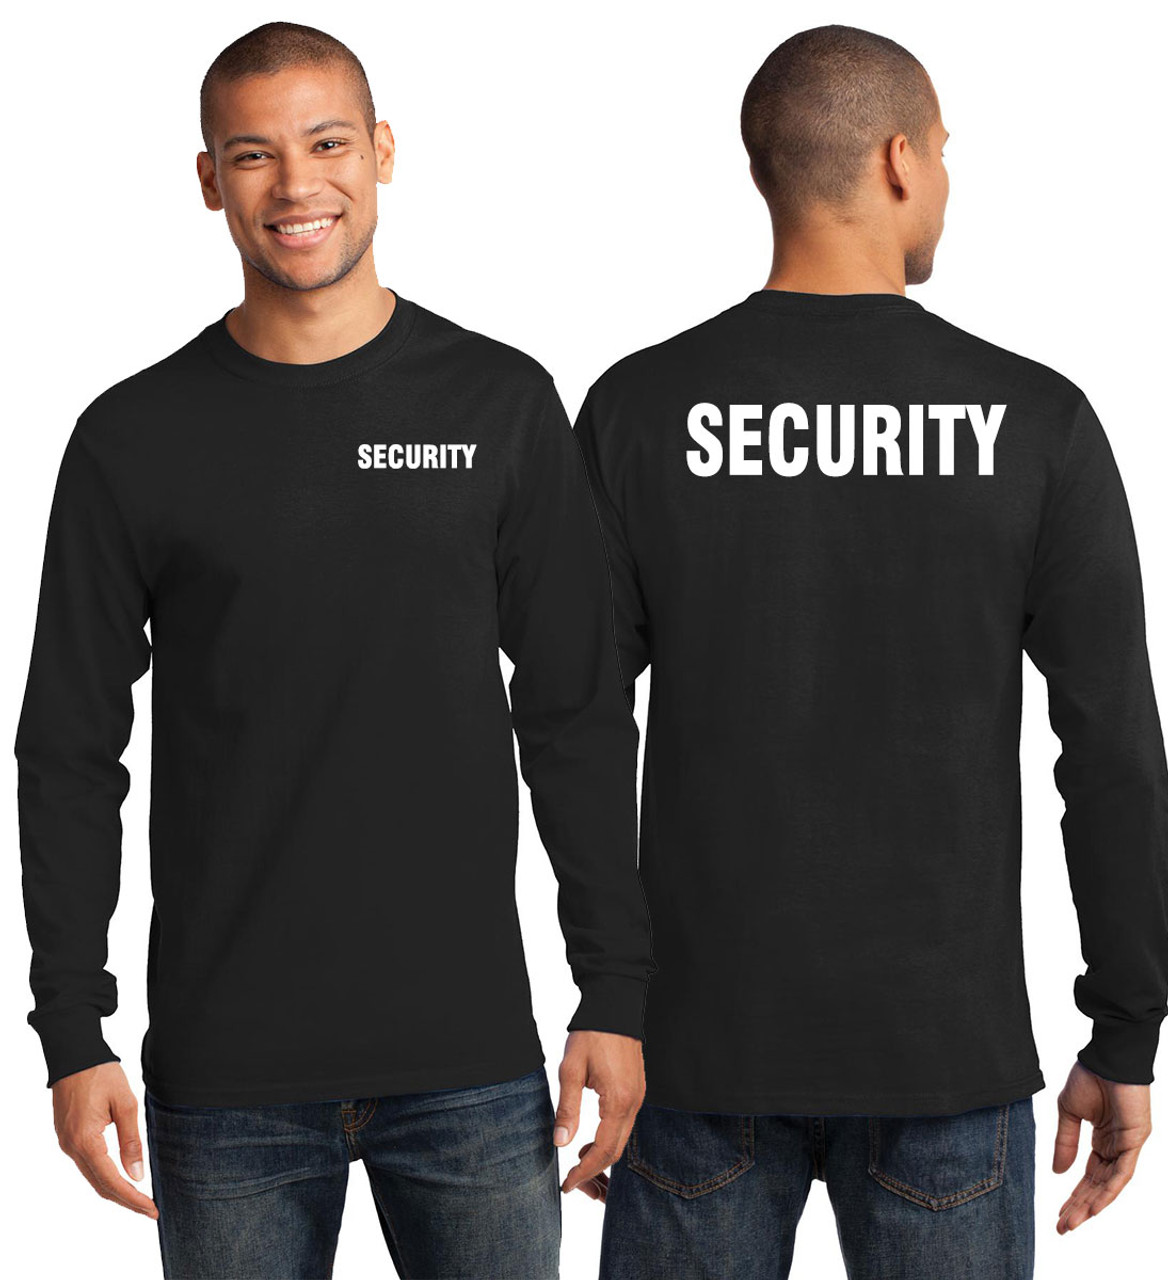 Ledsager Hassy vedholdende Long Sleeve Security T-Shirt with Big and Tall